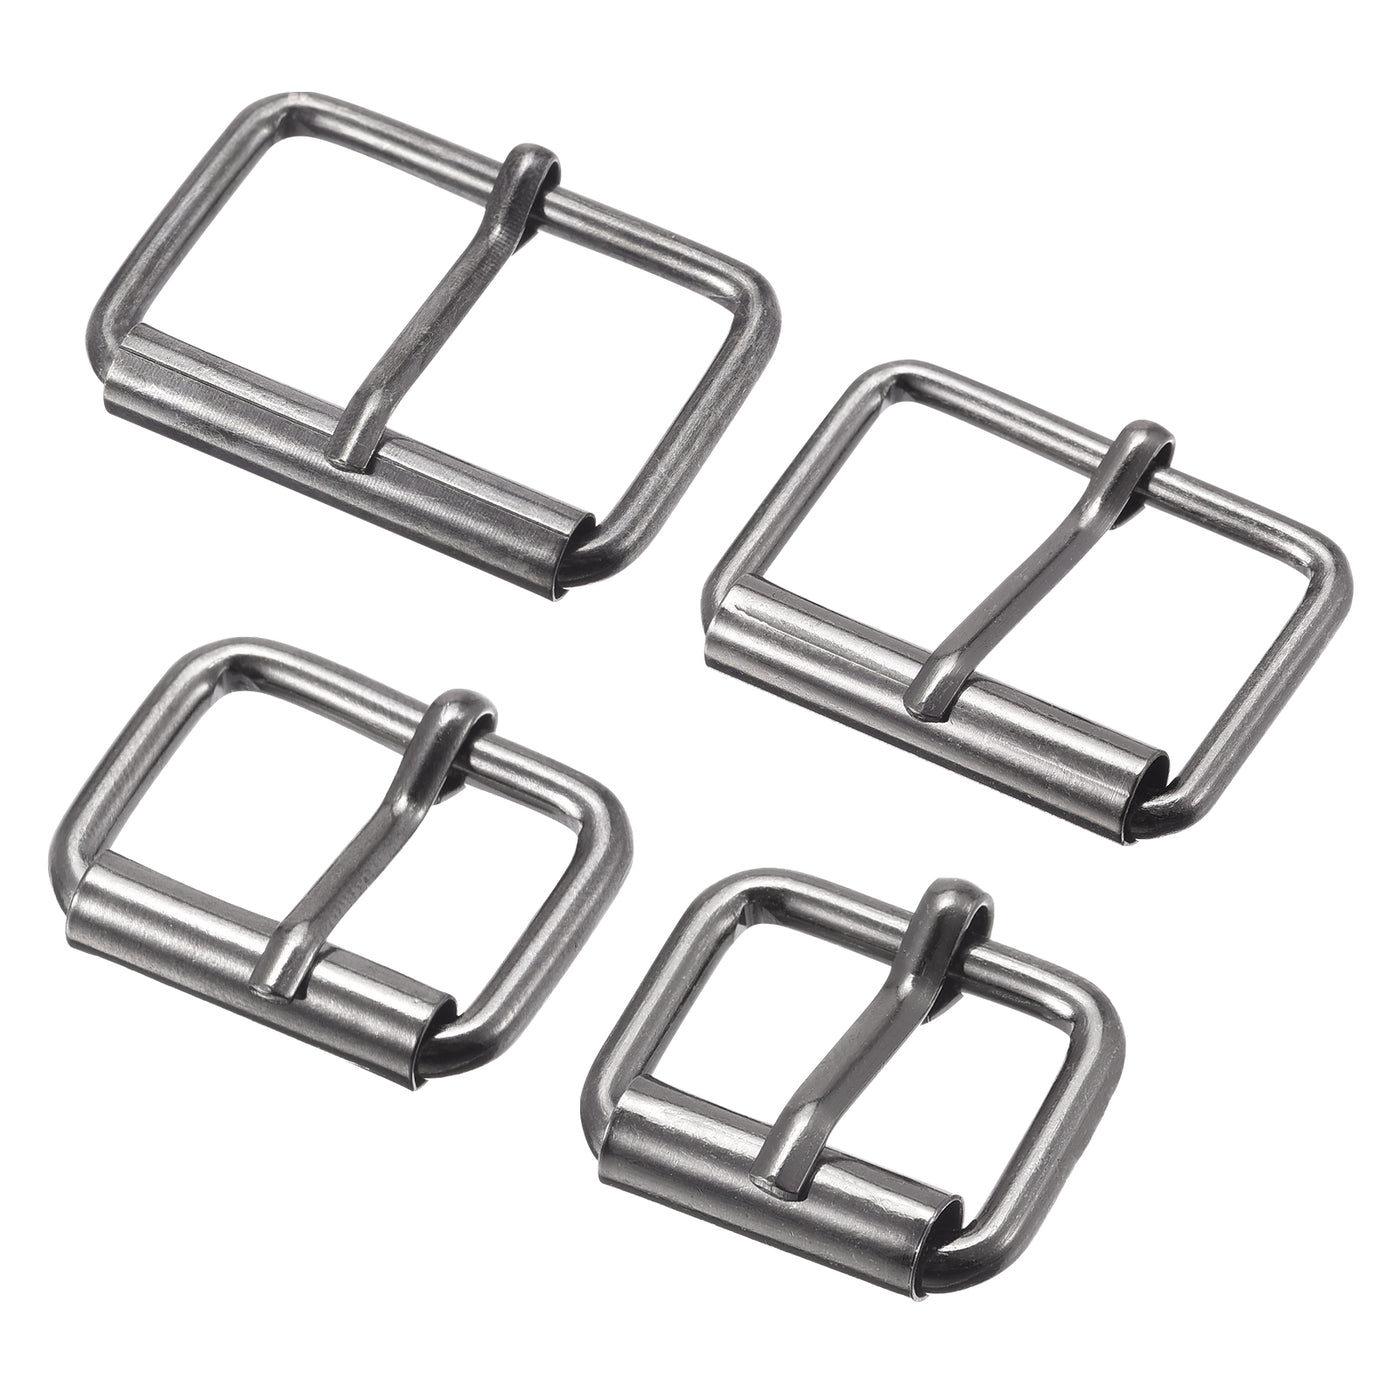 uxcell Uxcell Metal Roller Buckles 4 Sizes for Belts Bags Straps DIY Dark Gray 20pcs